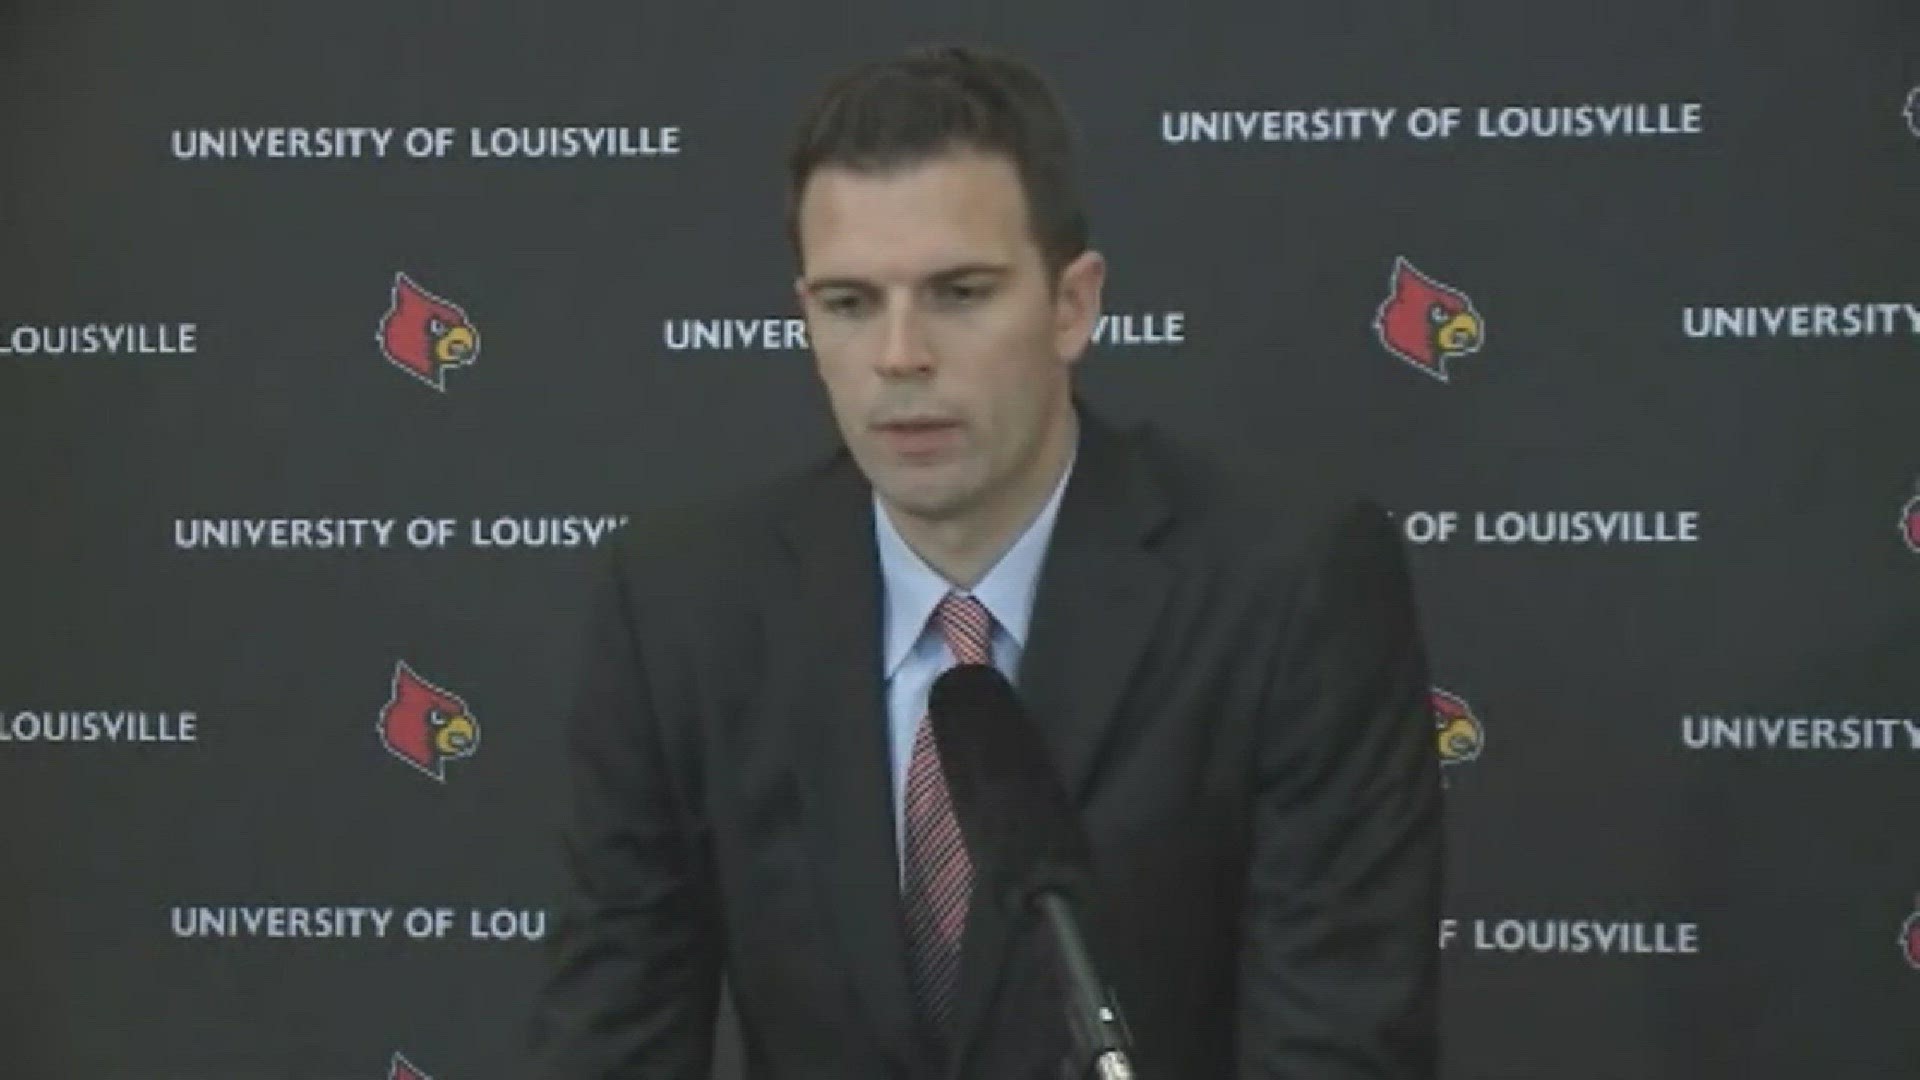 David Padgett speaks about his new role